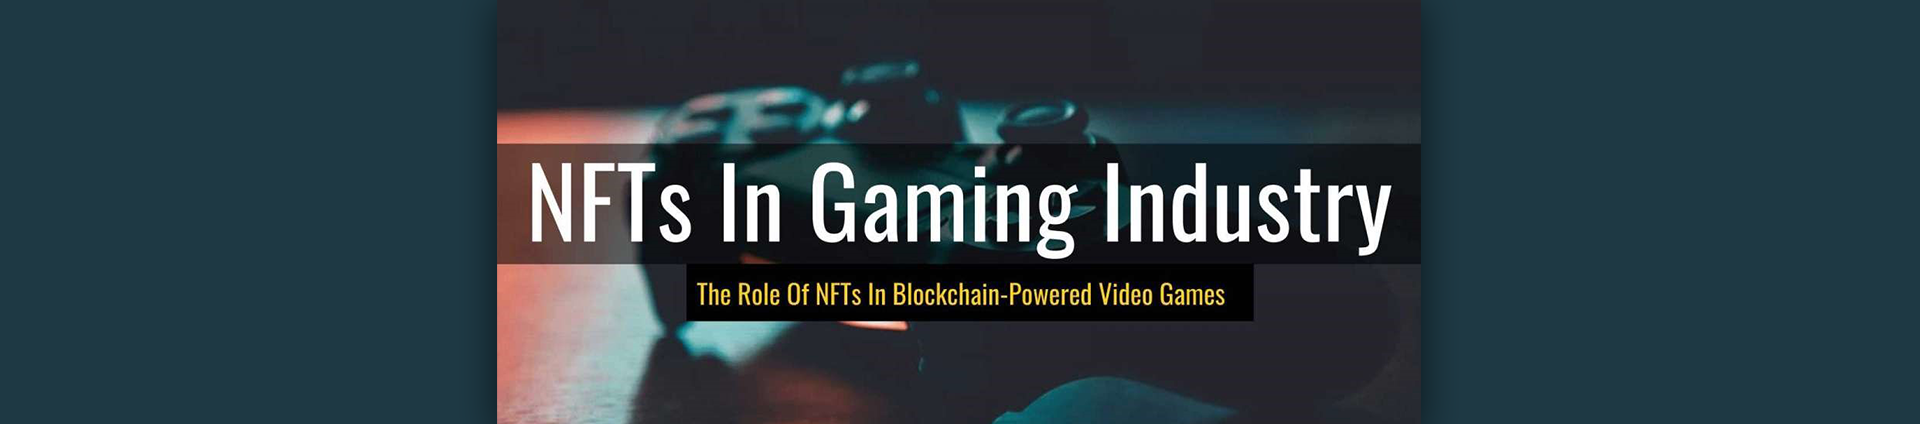 NFTs Role in Gaming Industry